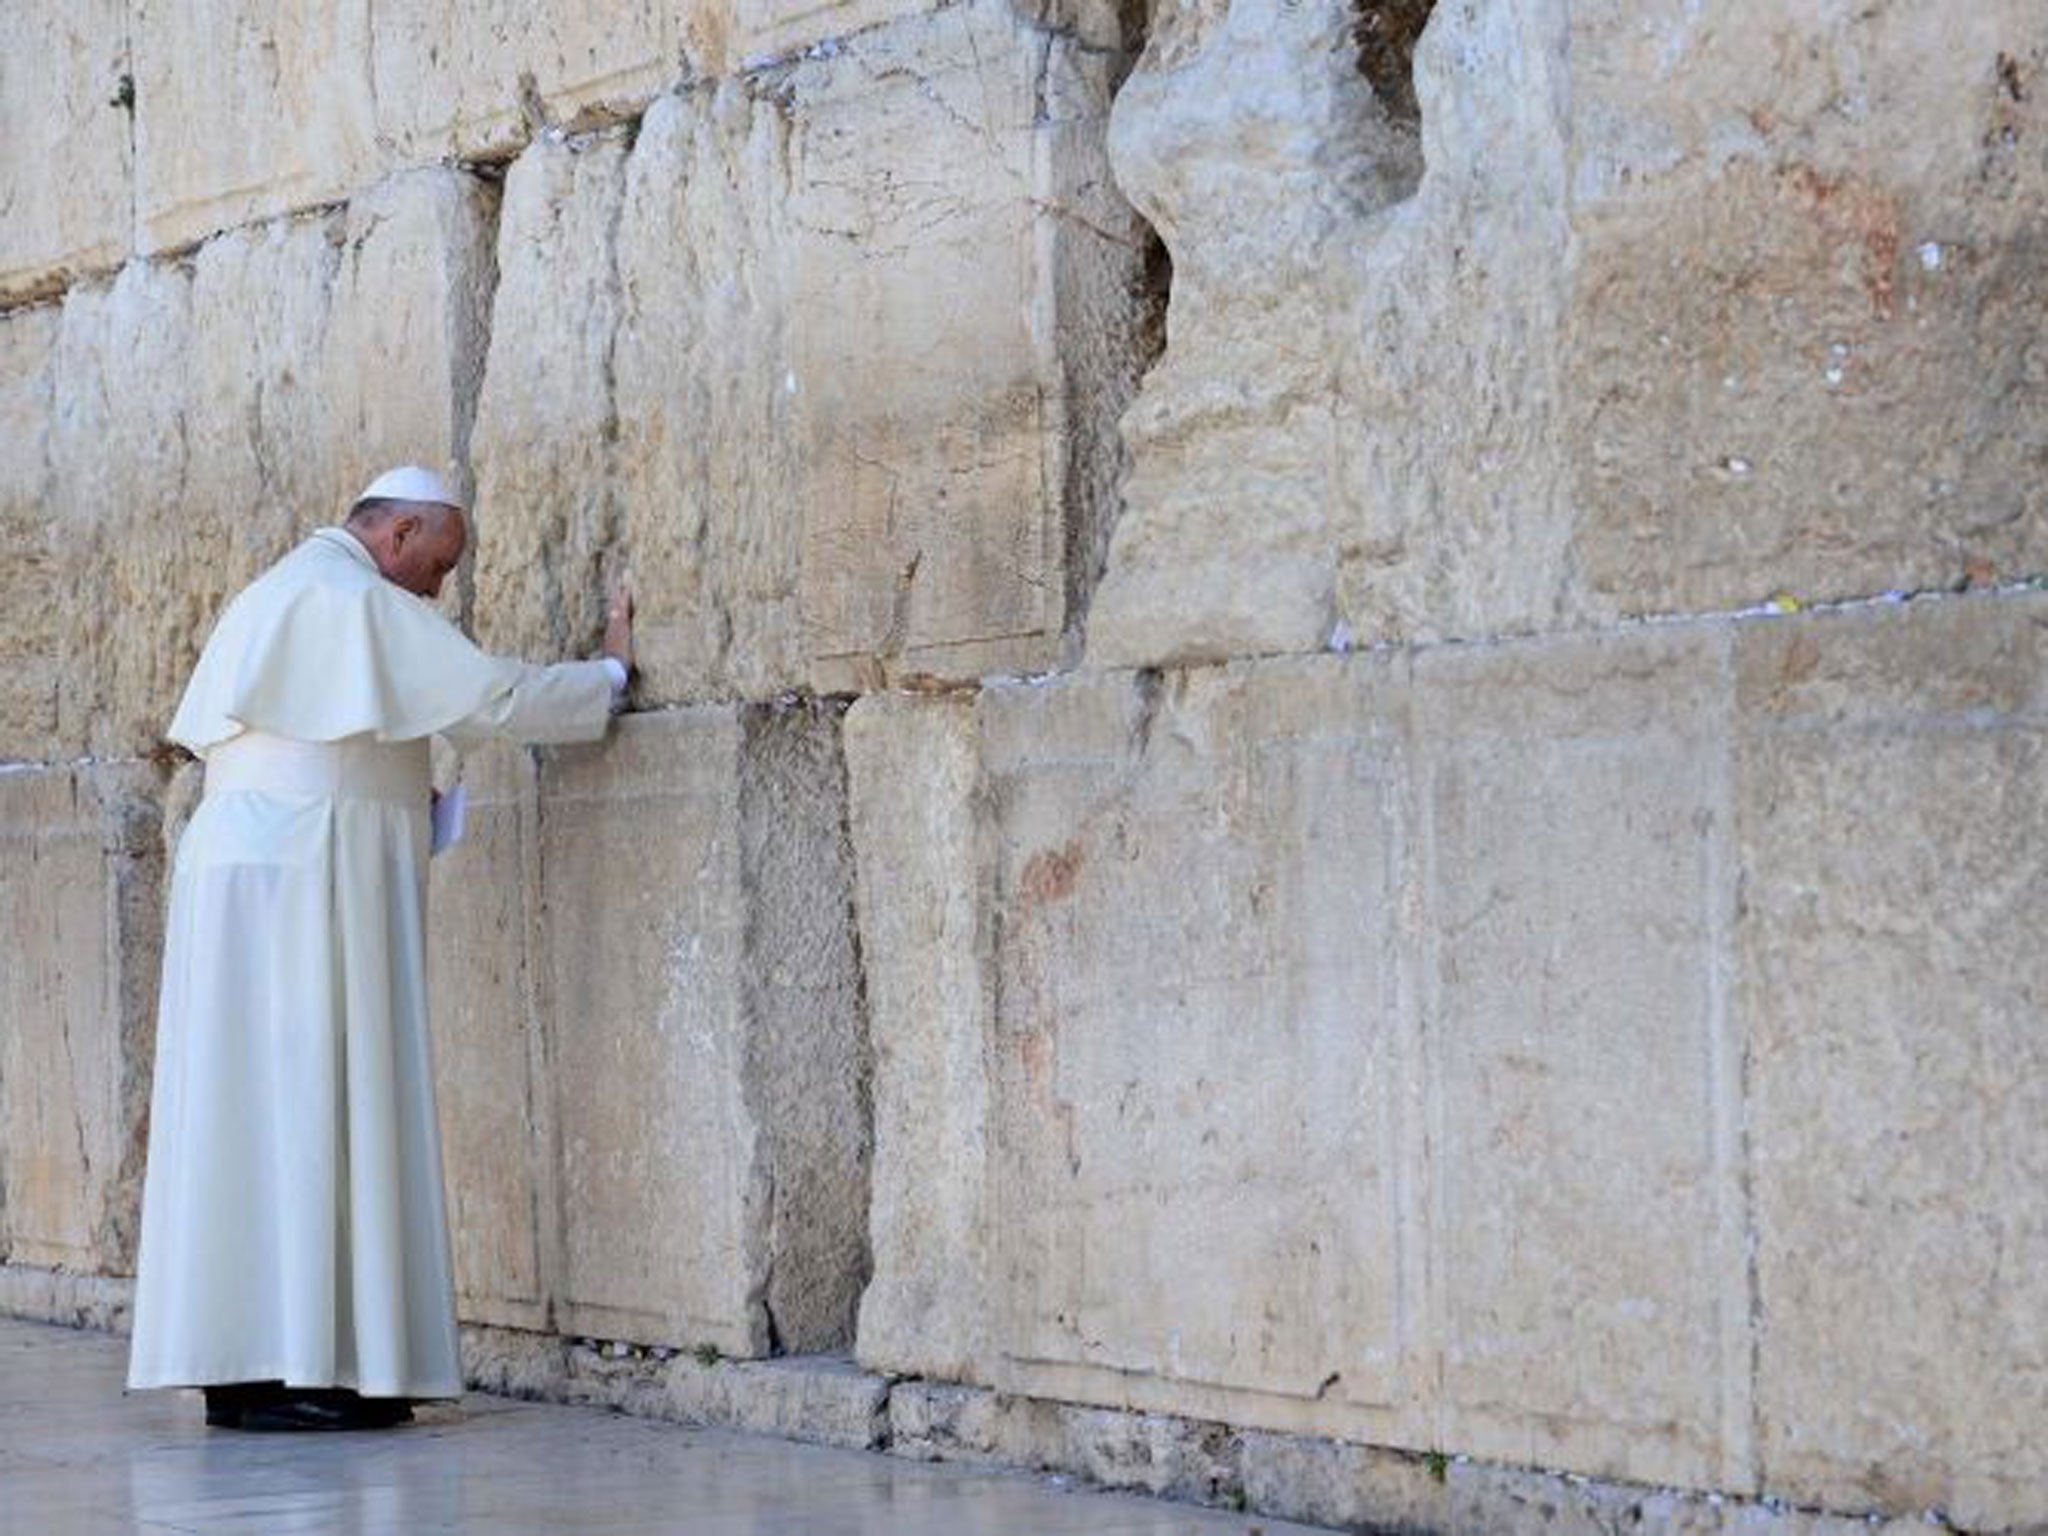 Pope Francis visiting the Western Wall, Judaism's holiest site, in Jerusalem's Old City, Israel, on 26 May, 2014